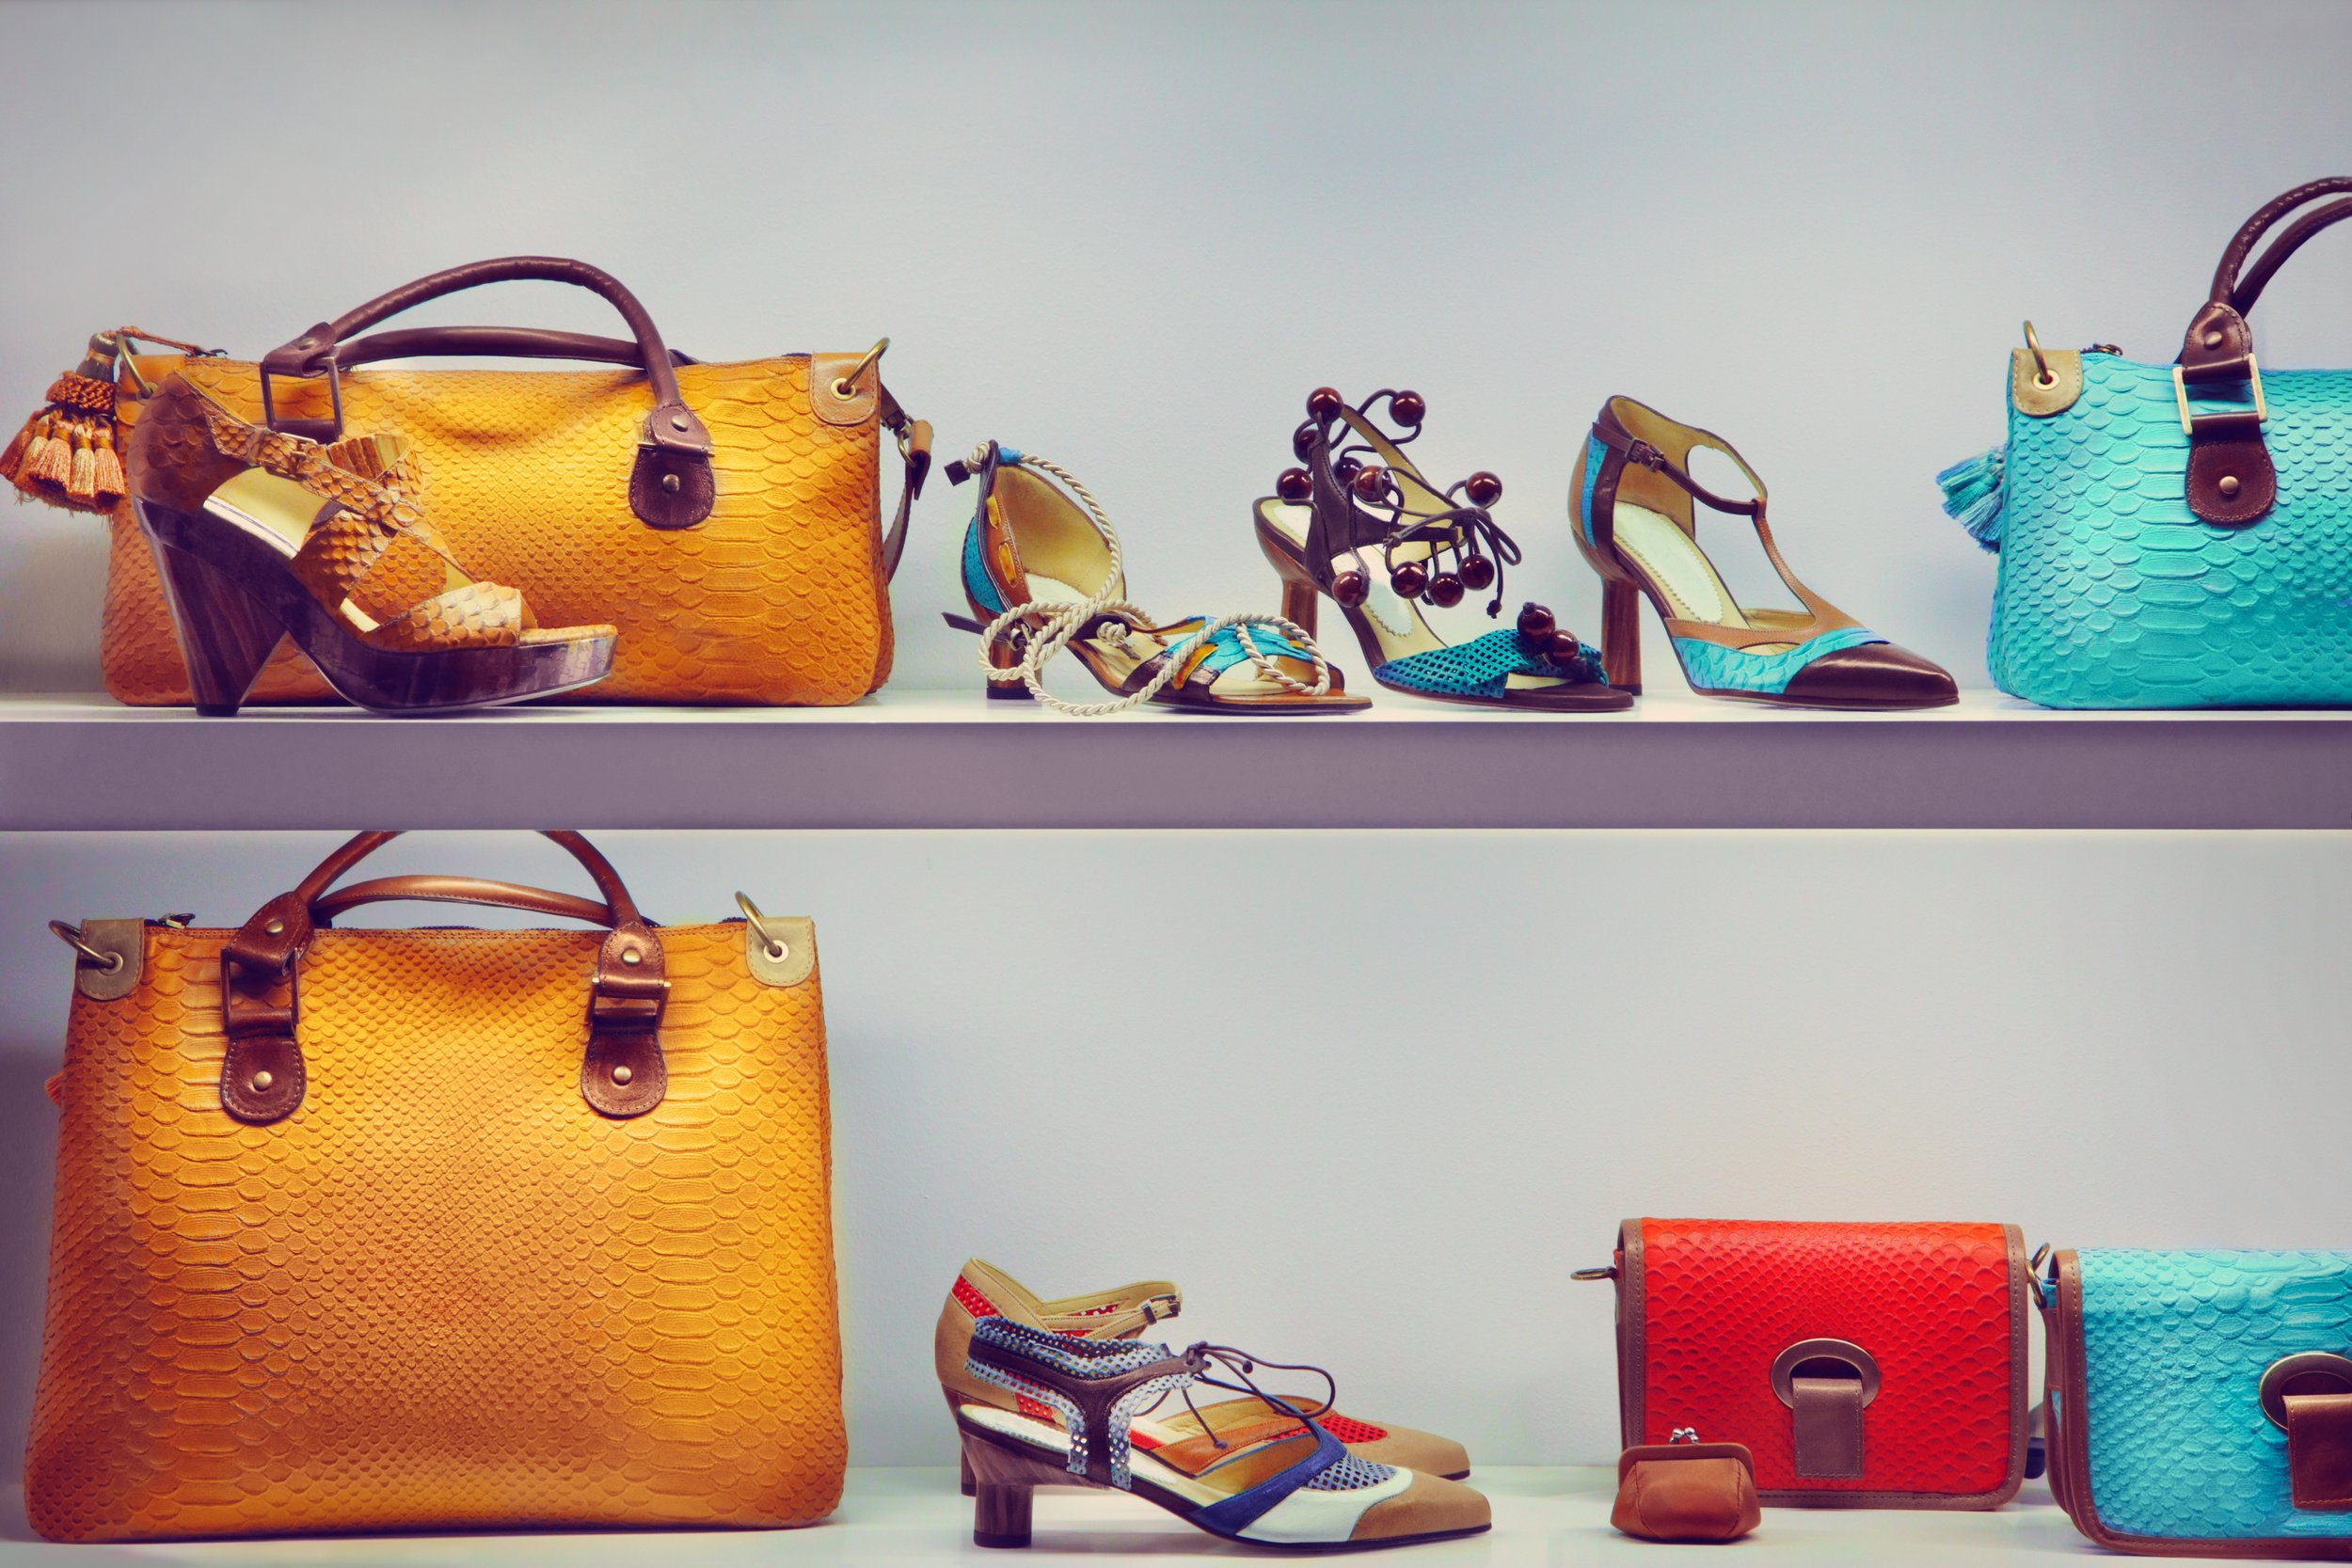 Personal Shopper - shoes and bags.jpg